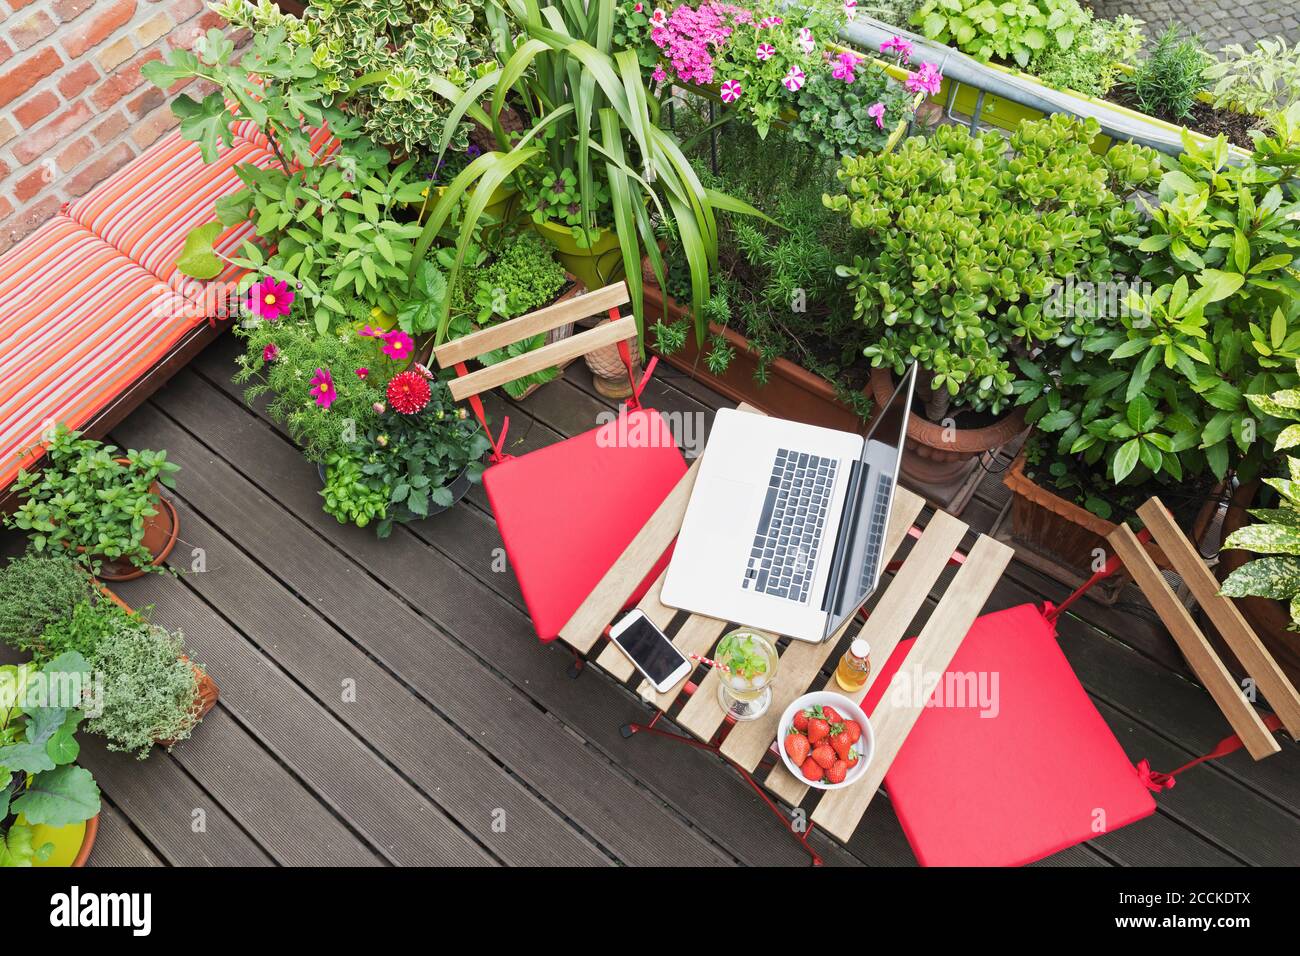 Laptop lying on balcony table surrounded by various summer herbs and flowers Stock Photo